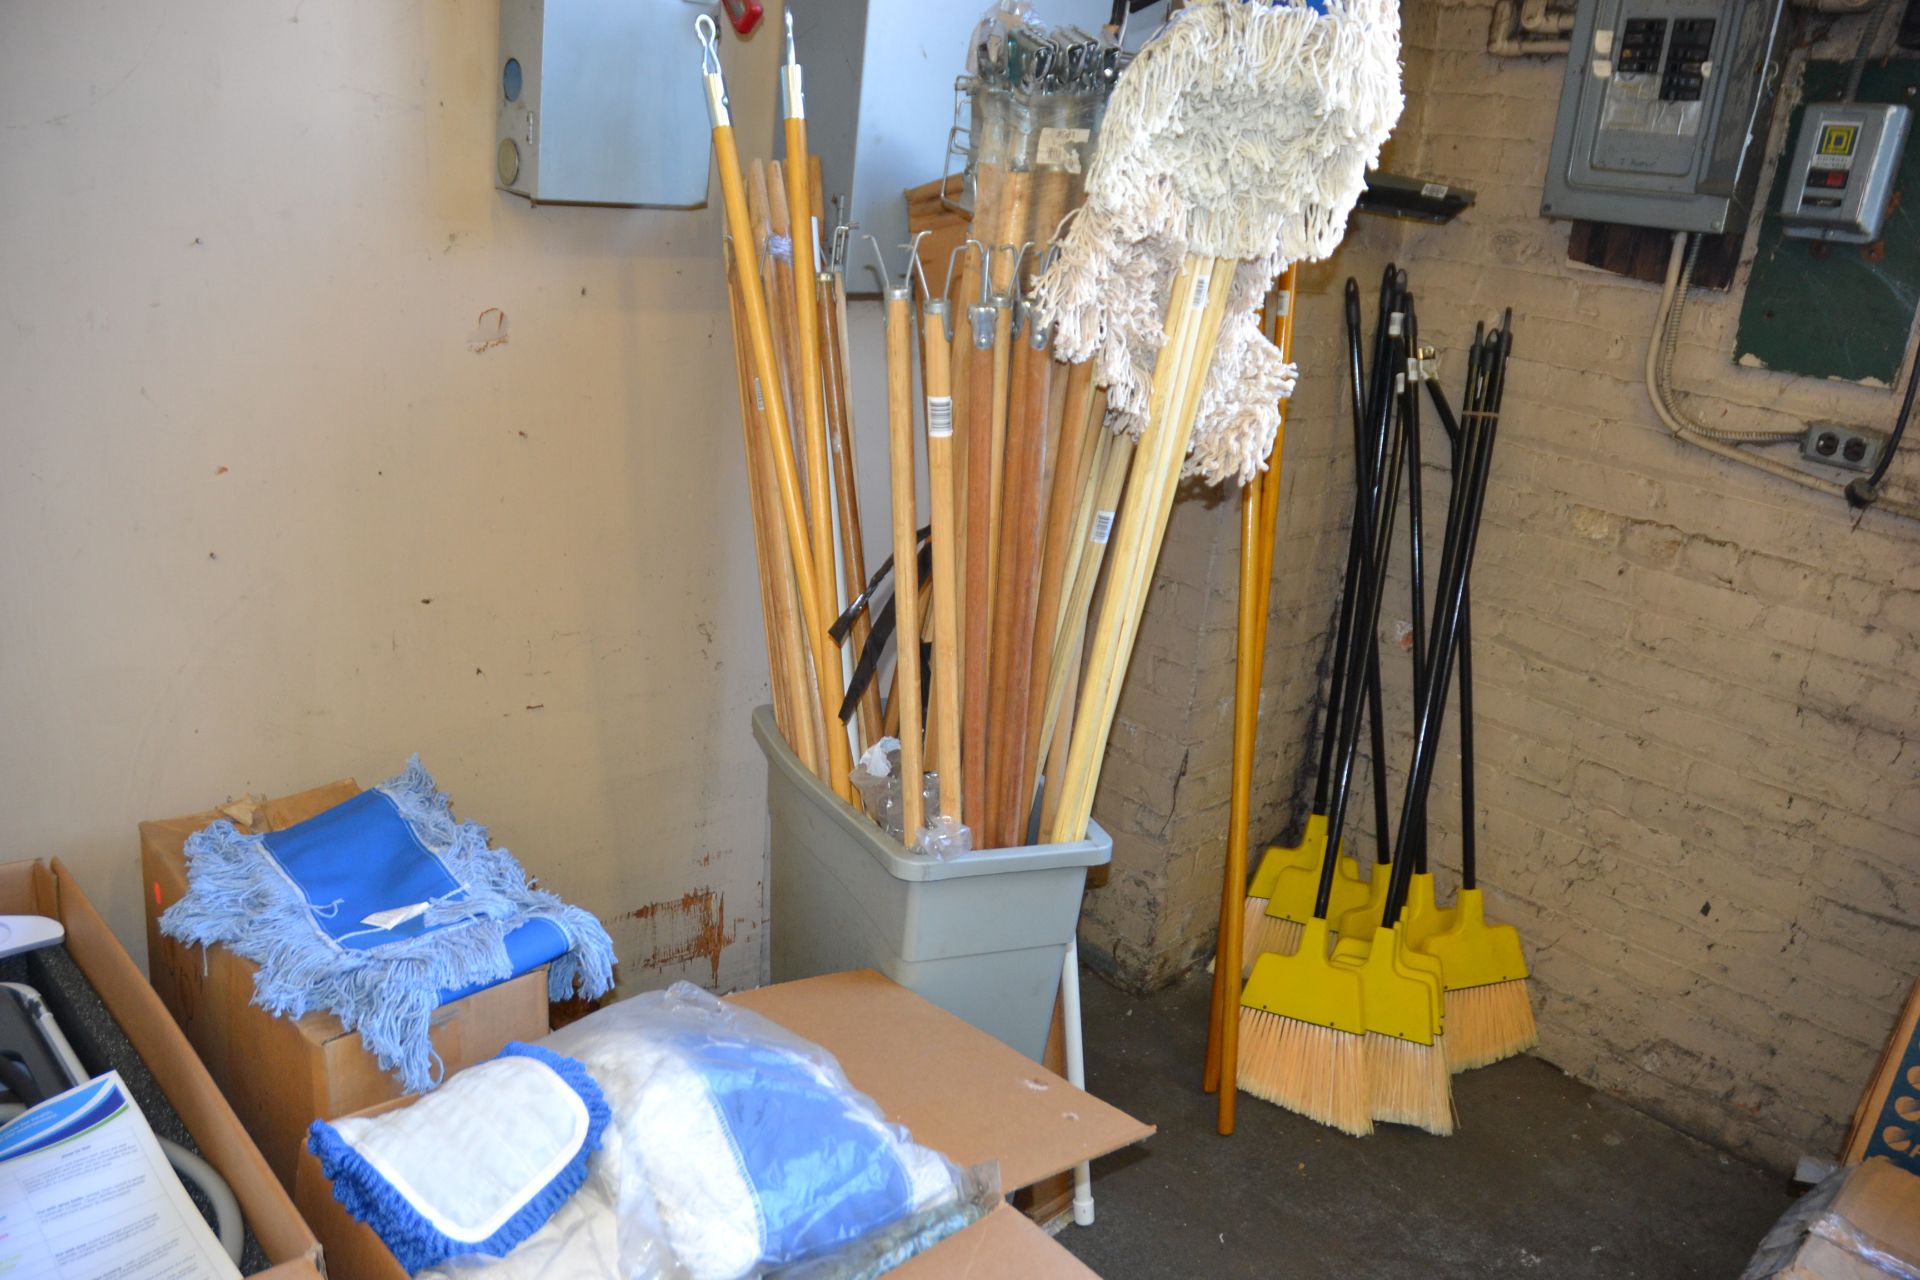 Lot - 2 Chemical Dispensers, Dust Mops, Broom Sticks - Image 2 of 2